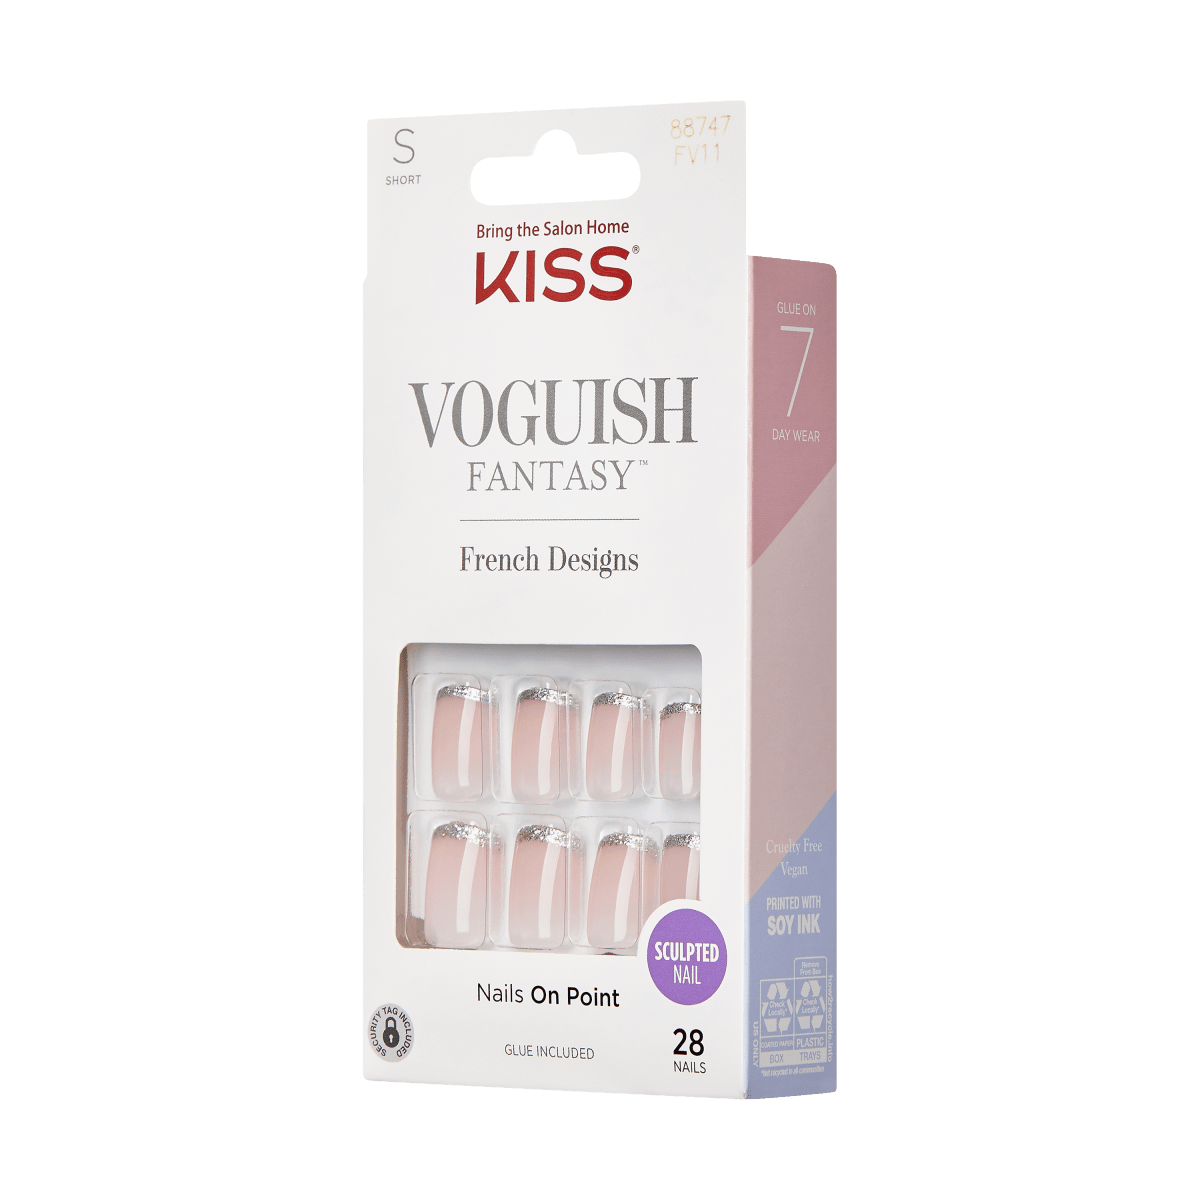 KISS Voguish Fantasy French Press-On Nails, Bisous, Pink, Short Square ...